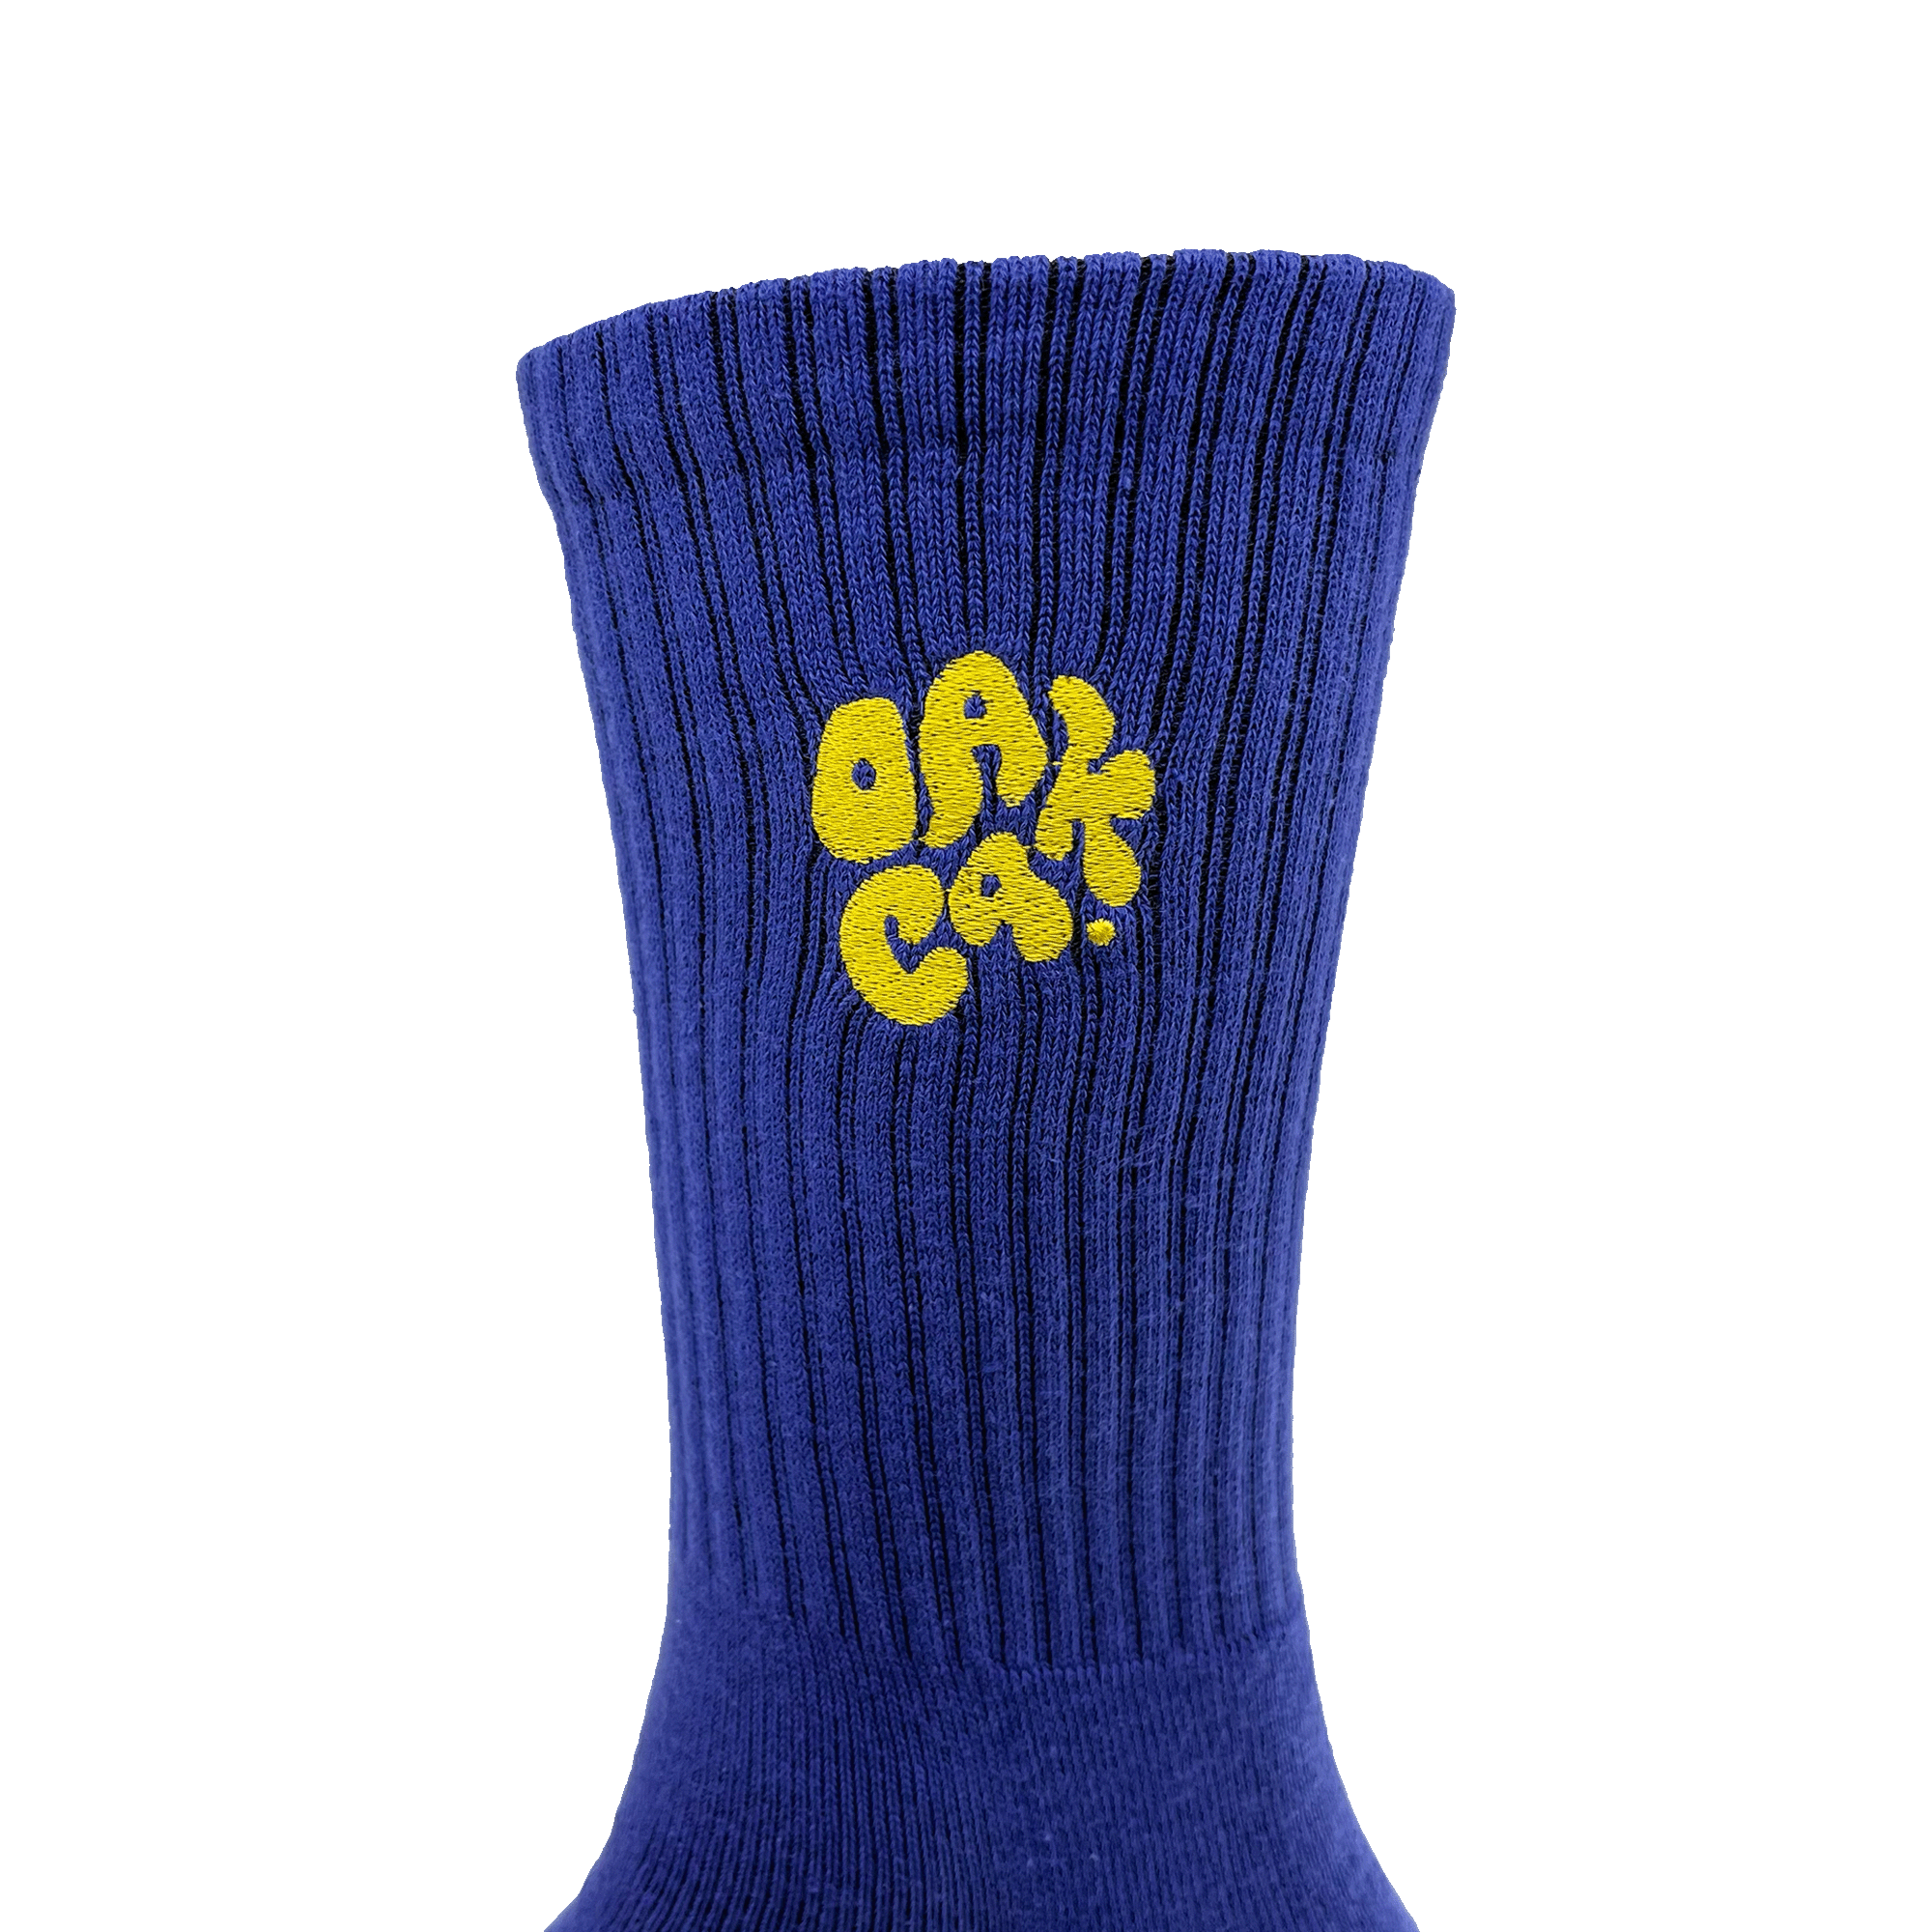 Close-up of embroidered yellow OAK CA blob-style wordmark on the side of blue crew sock.